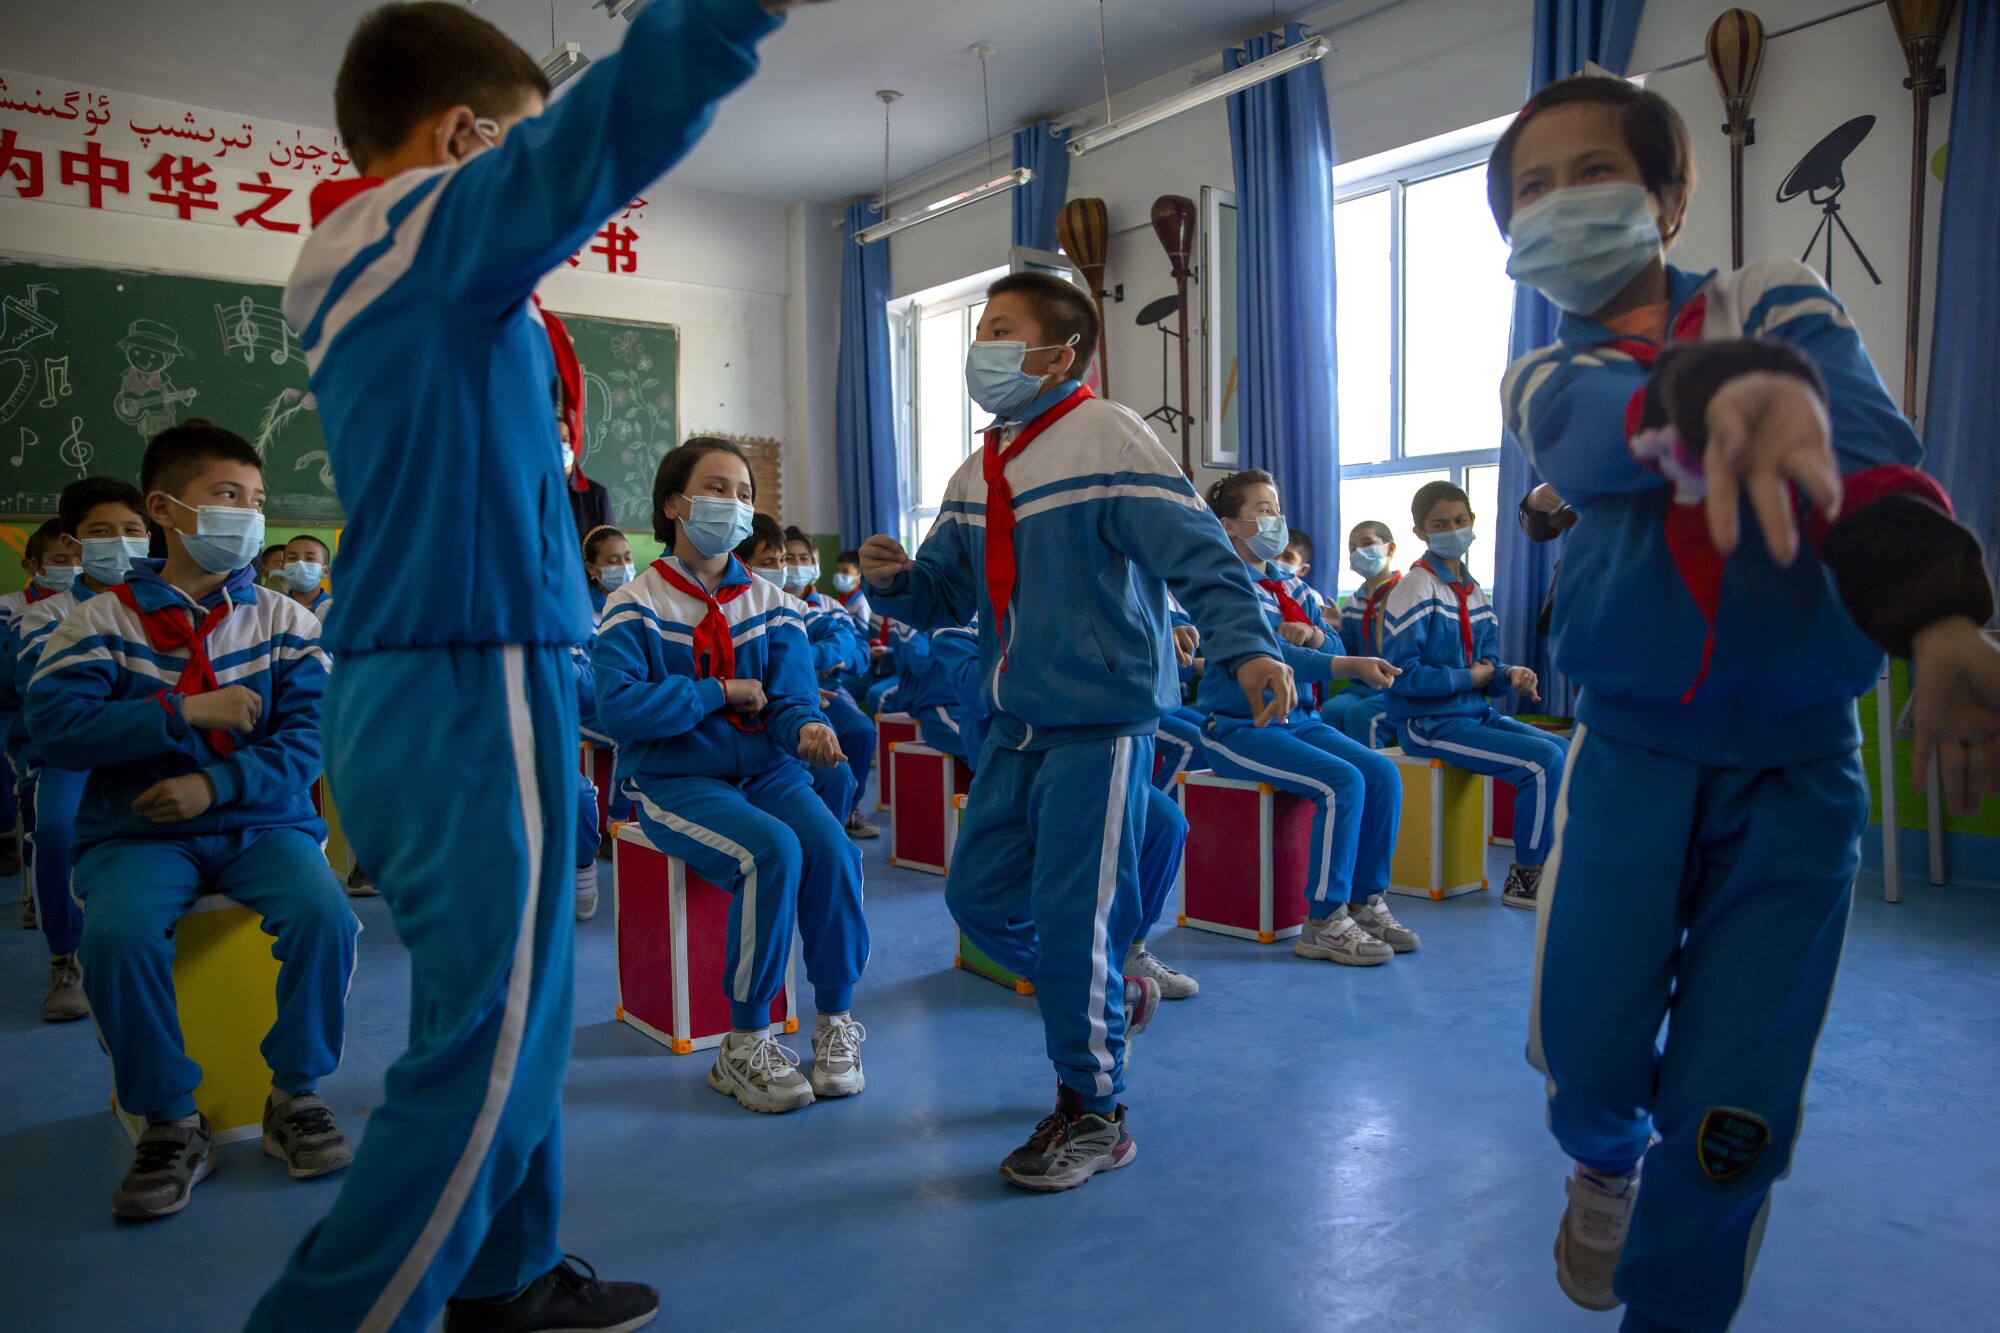 Schoolchildren in light blue and white uniforms with red scarves dance in a classroom 